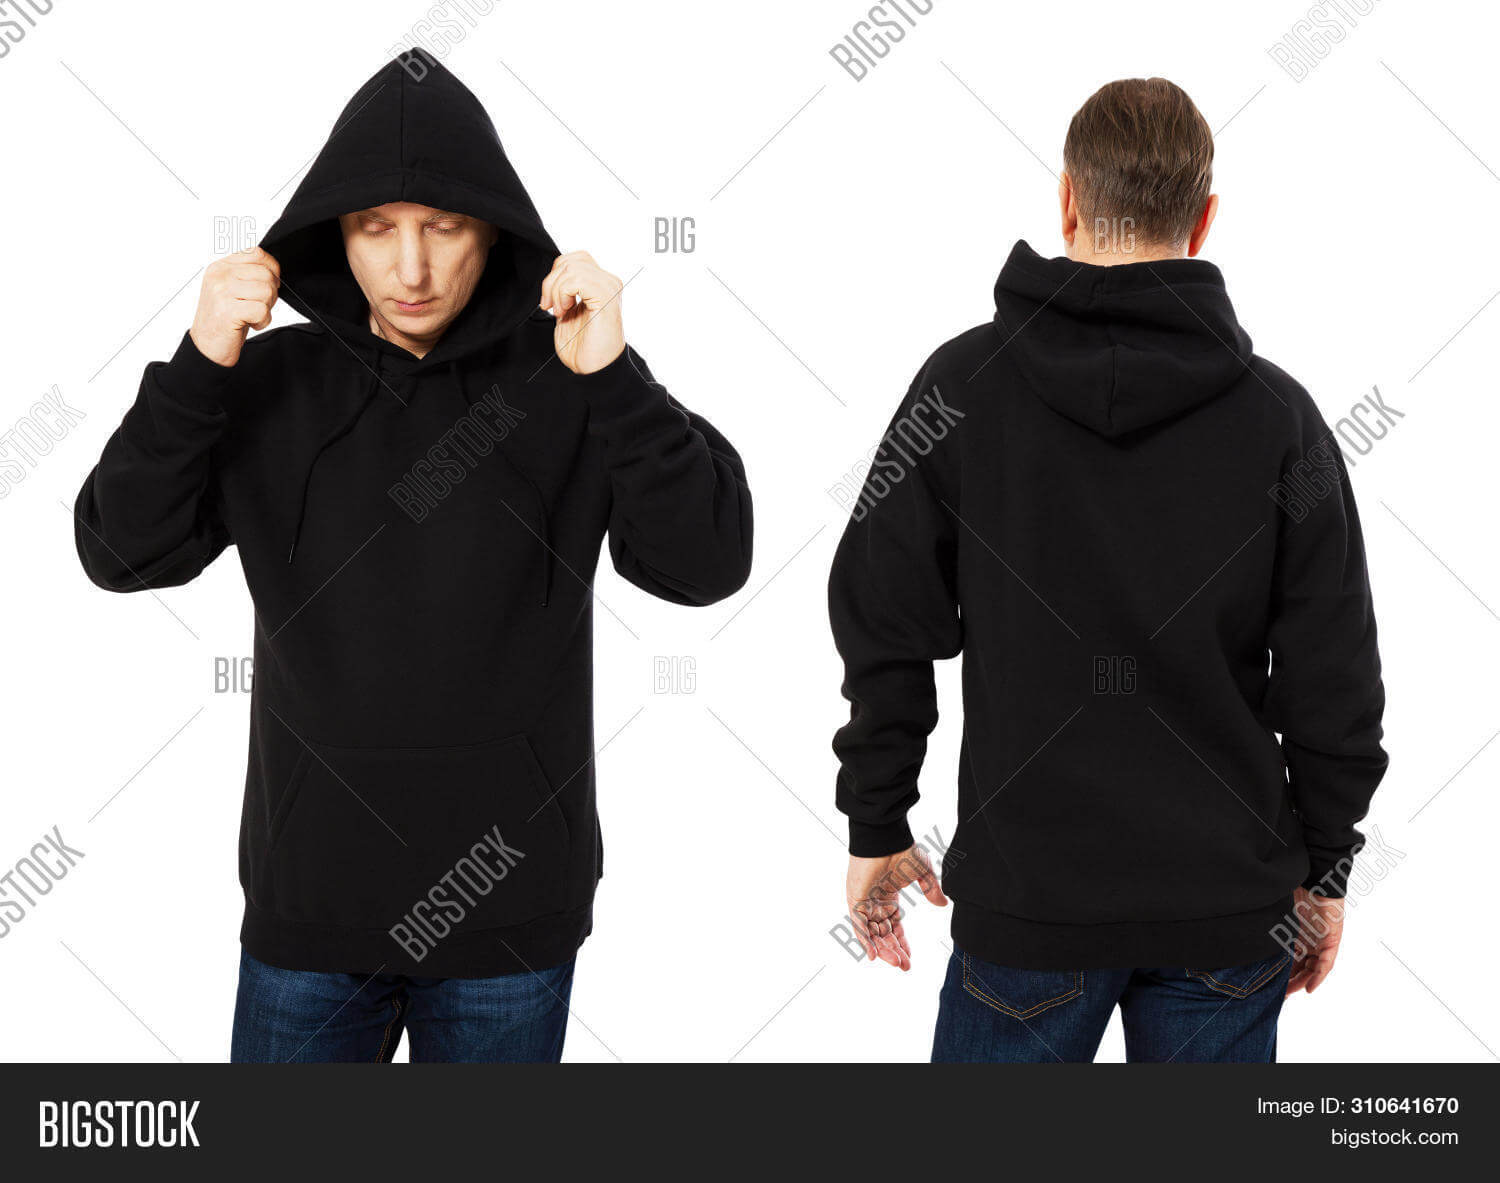 Man Template Mens Image & Photo (Free Trial) | Bigstock Intended For Blank Black Hoodie Template